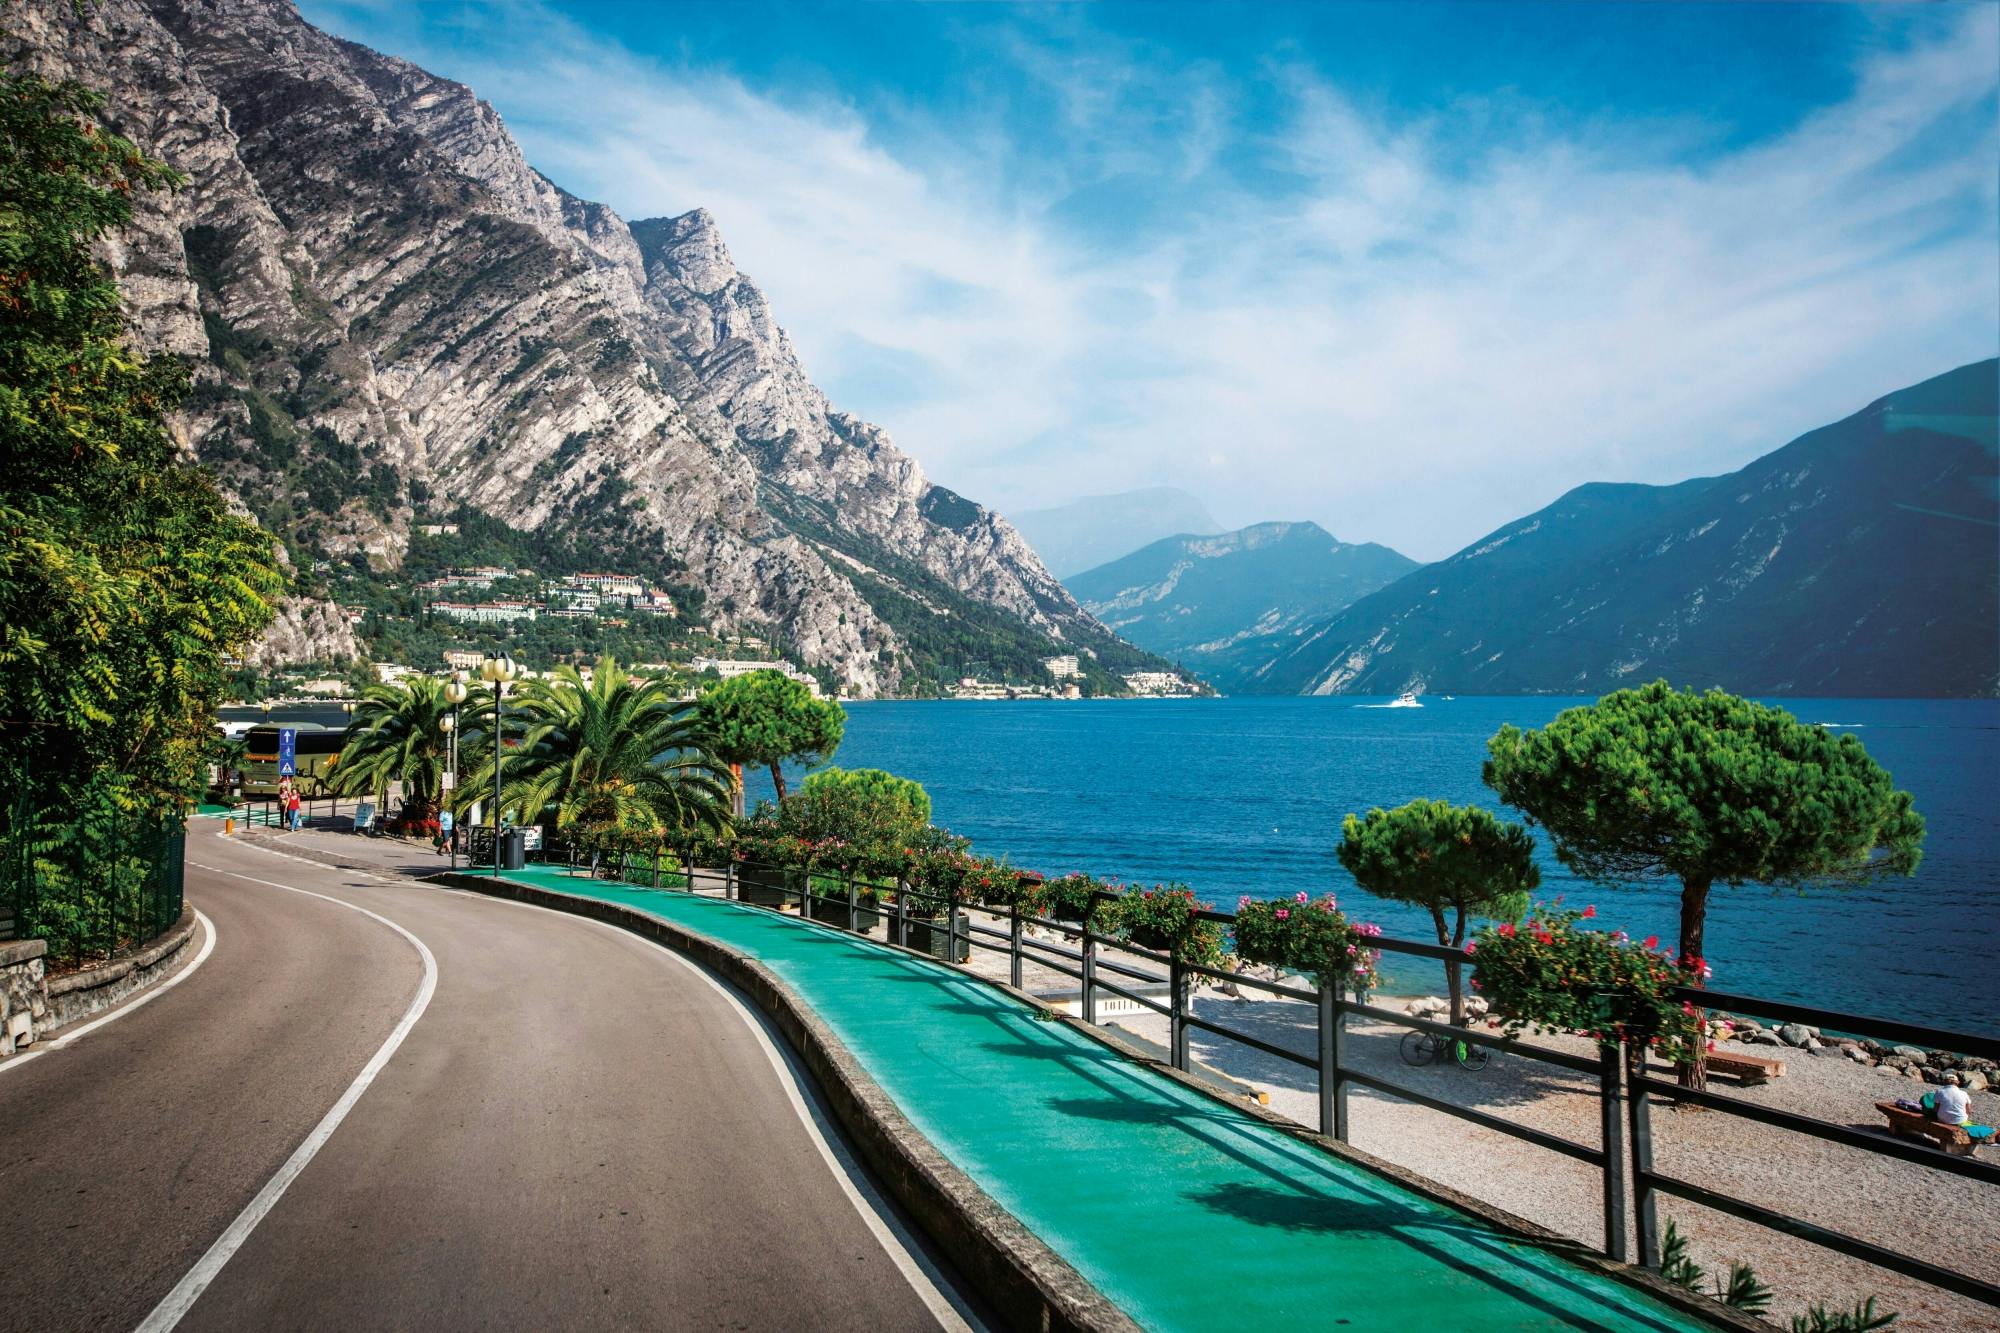 The Original Lake Garda Tour with Boat Trip - from Northern Hotels